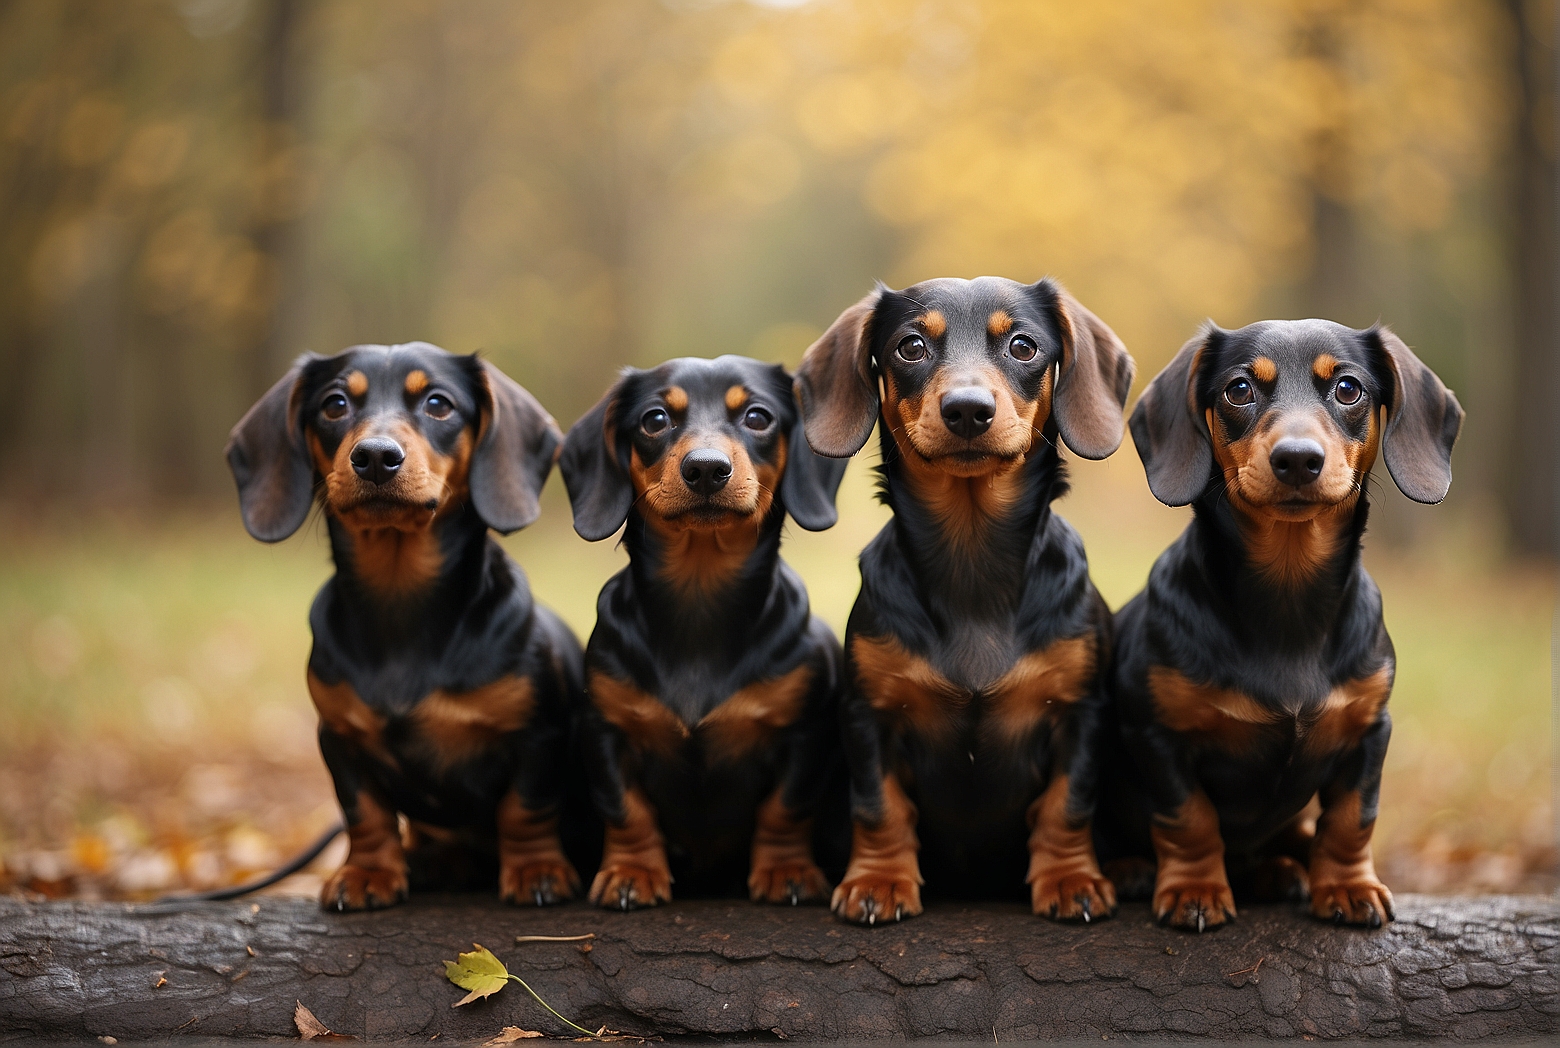 How Many Dachshunds Are There In The World